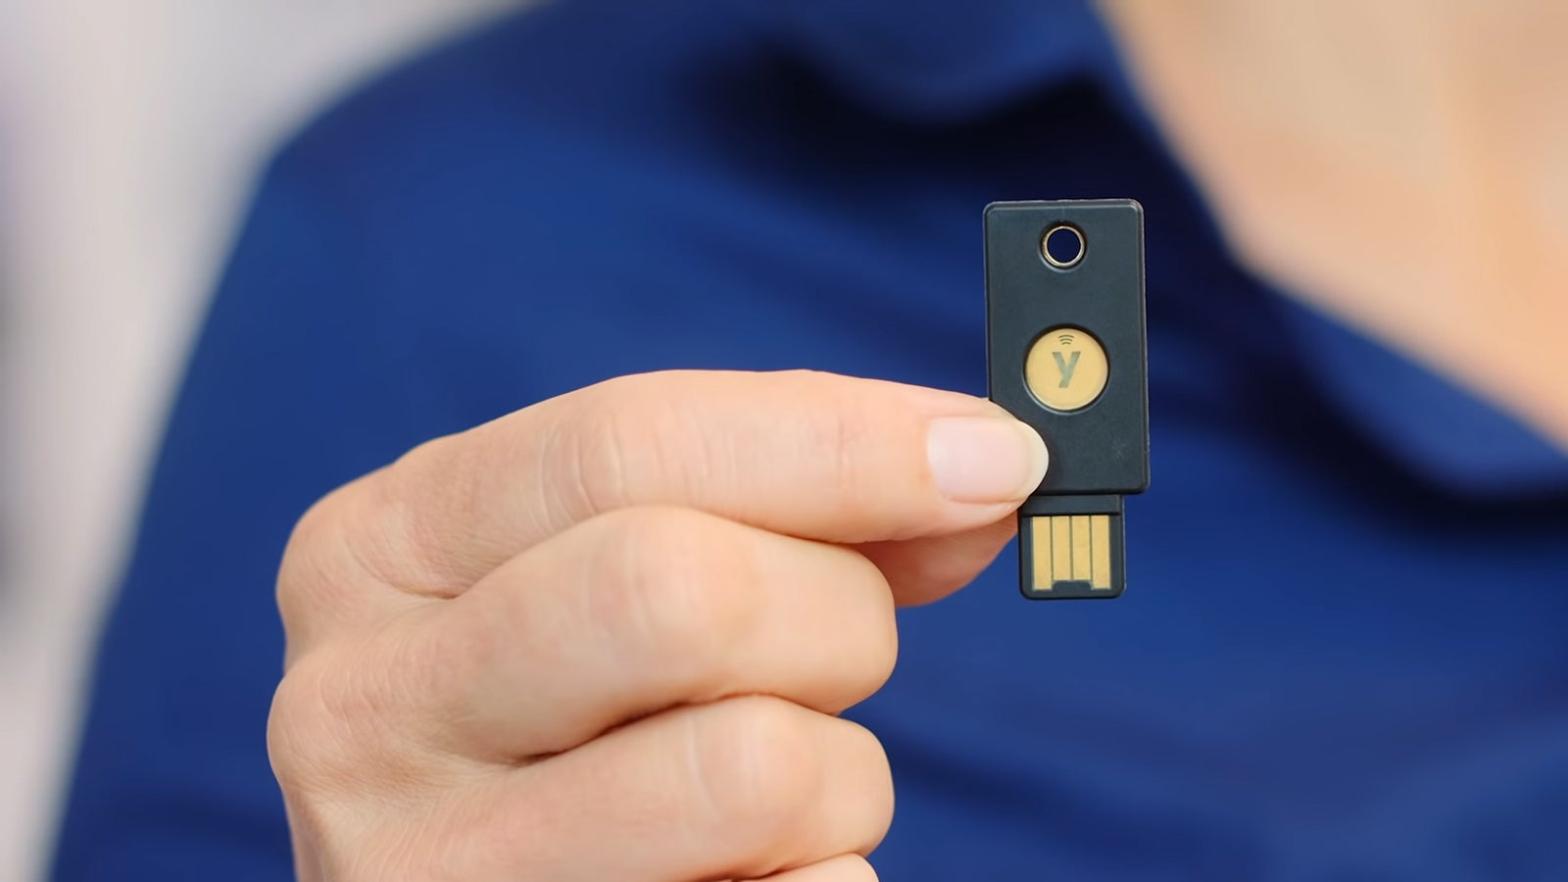 A physical security key can improve your account security. (Image: Yubico)